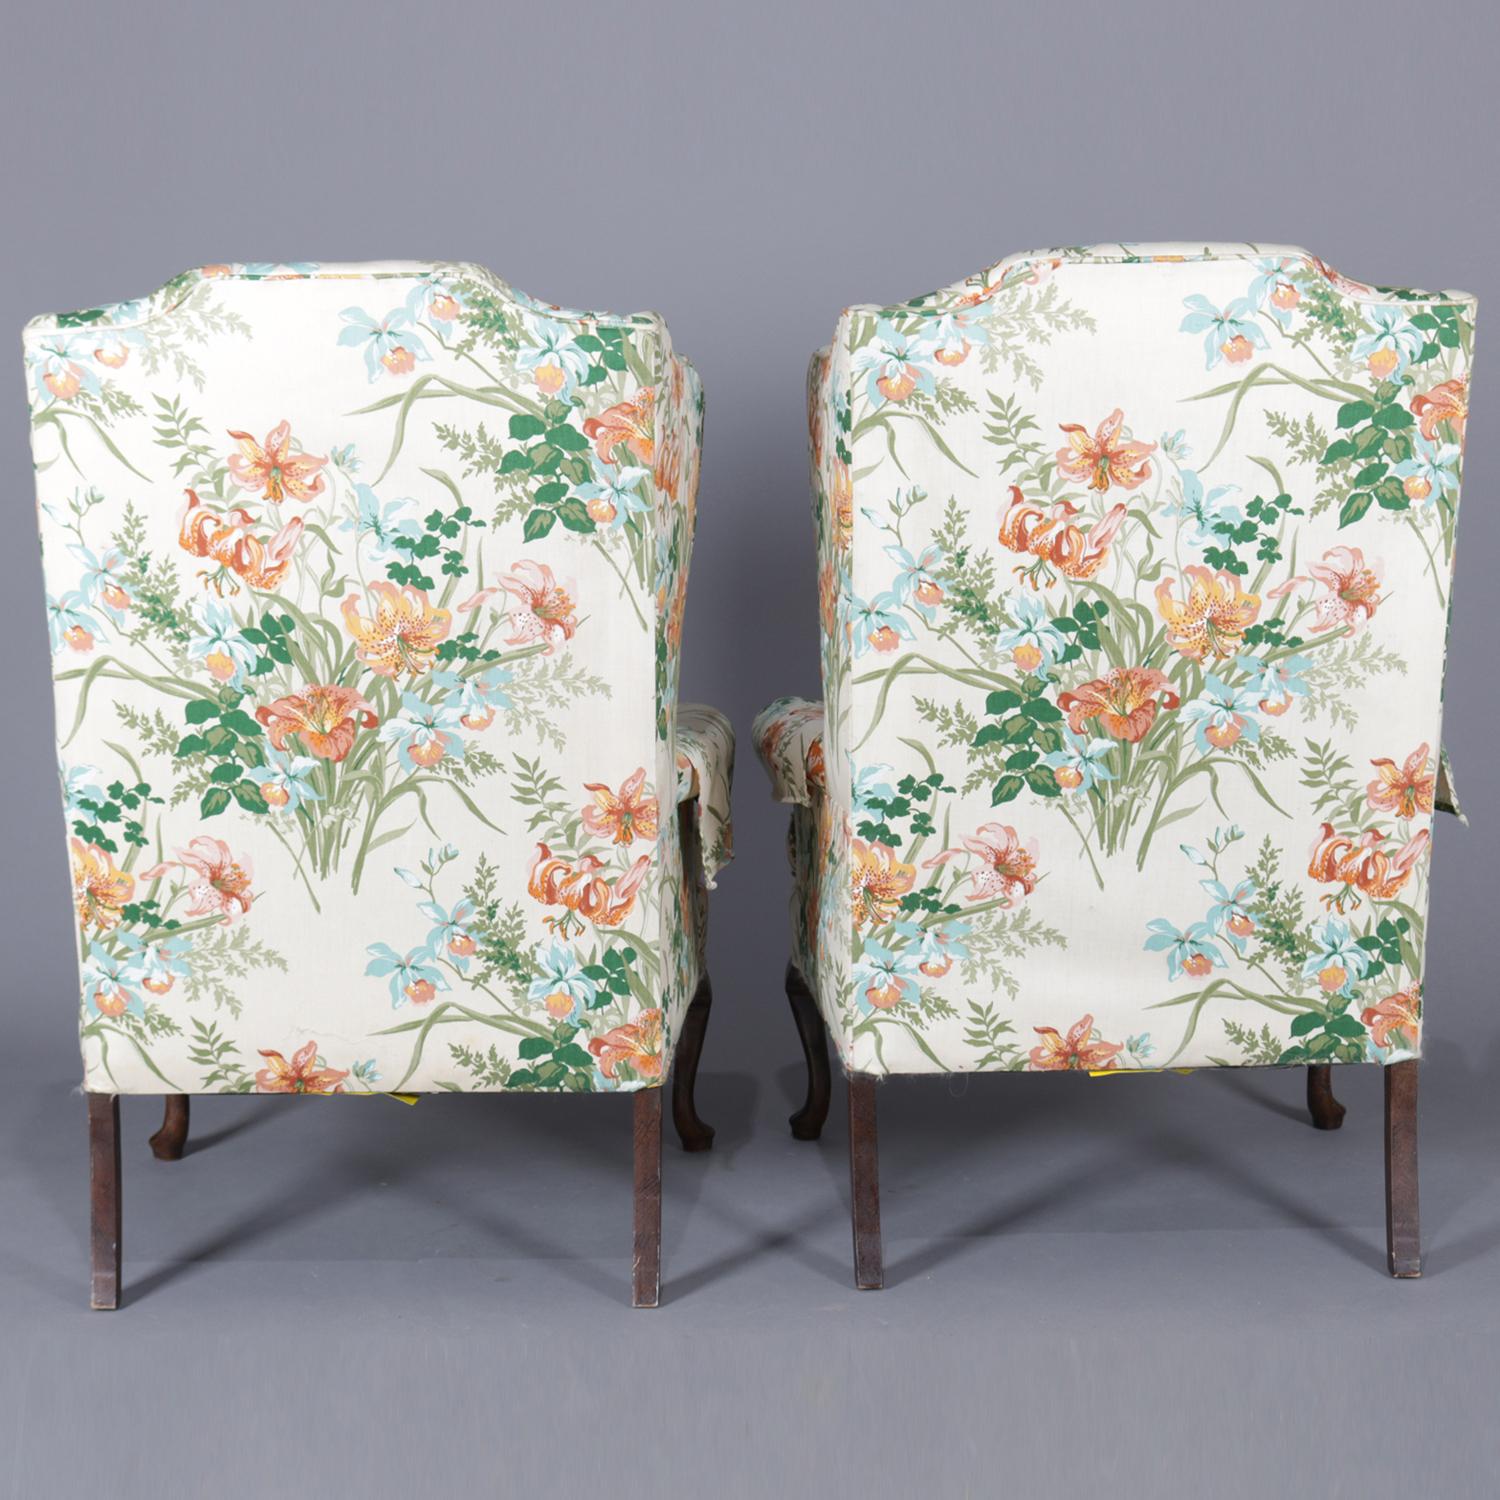 American Pair of Queen Anne Floral Fireside Wingback Chairs, Tigerlily Print, circa 1930